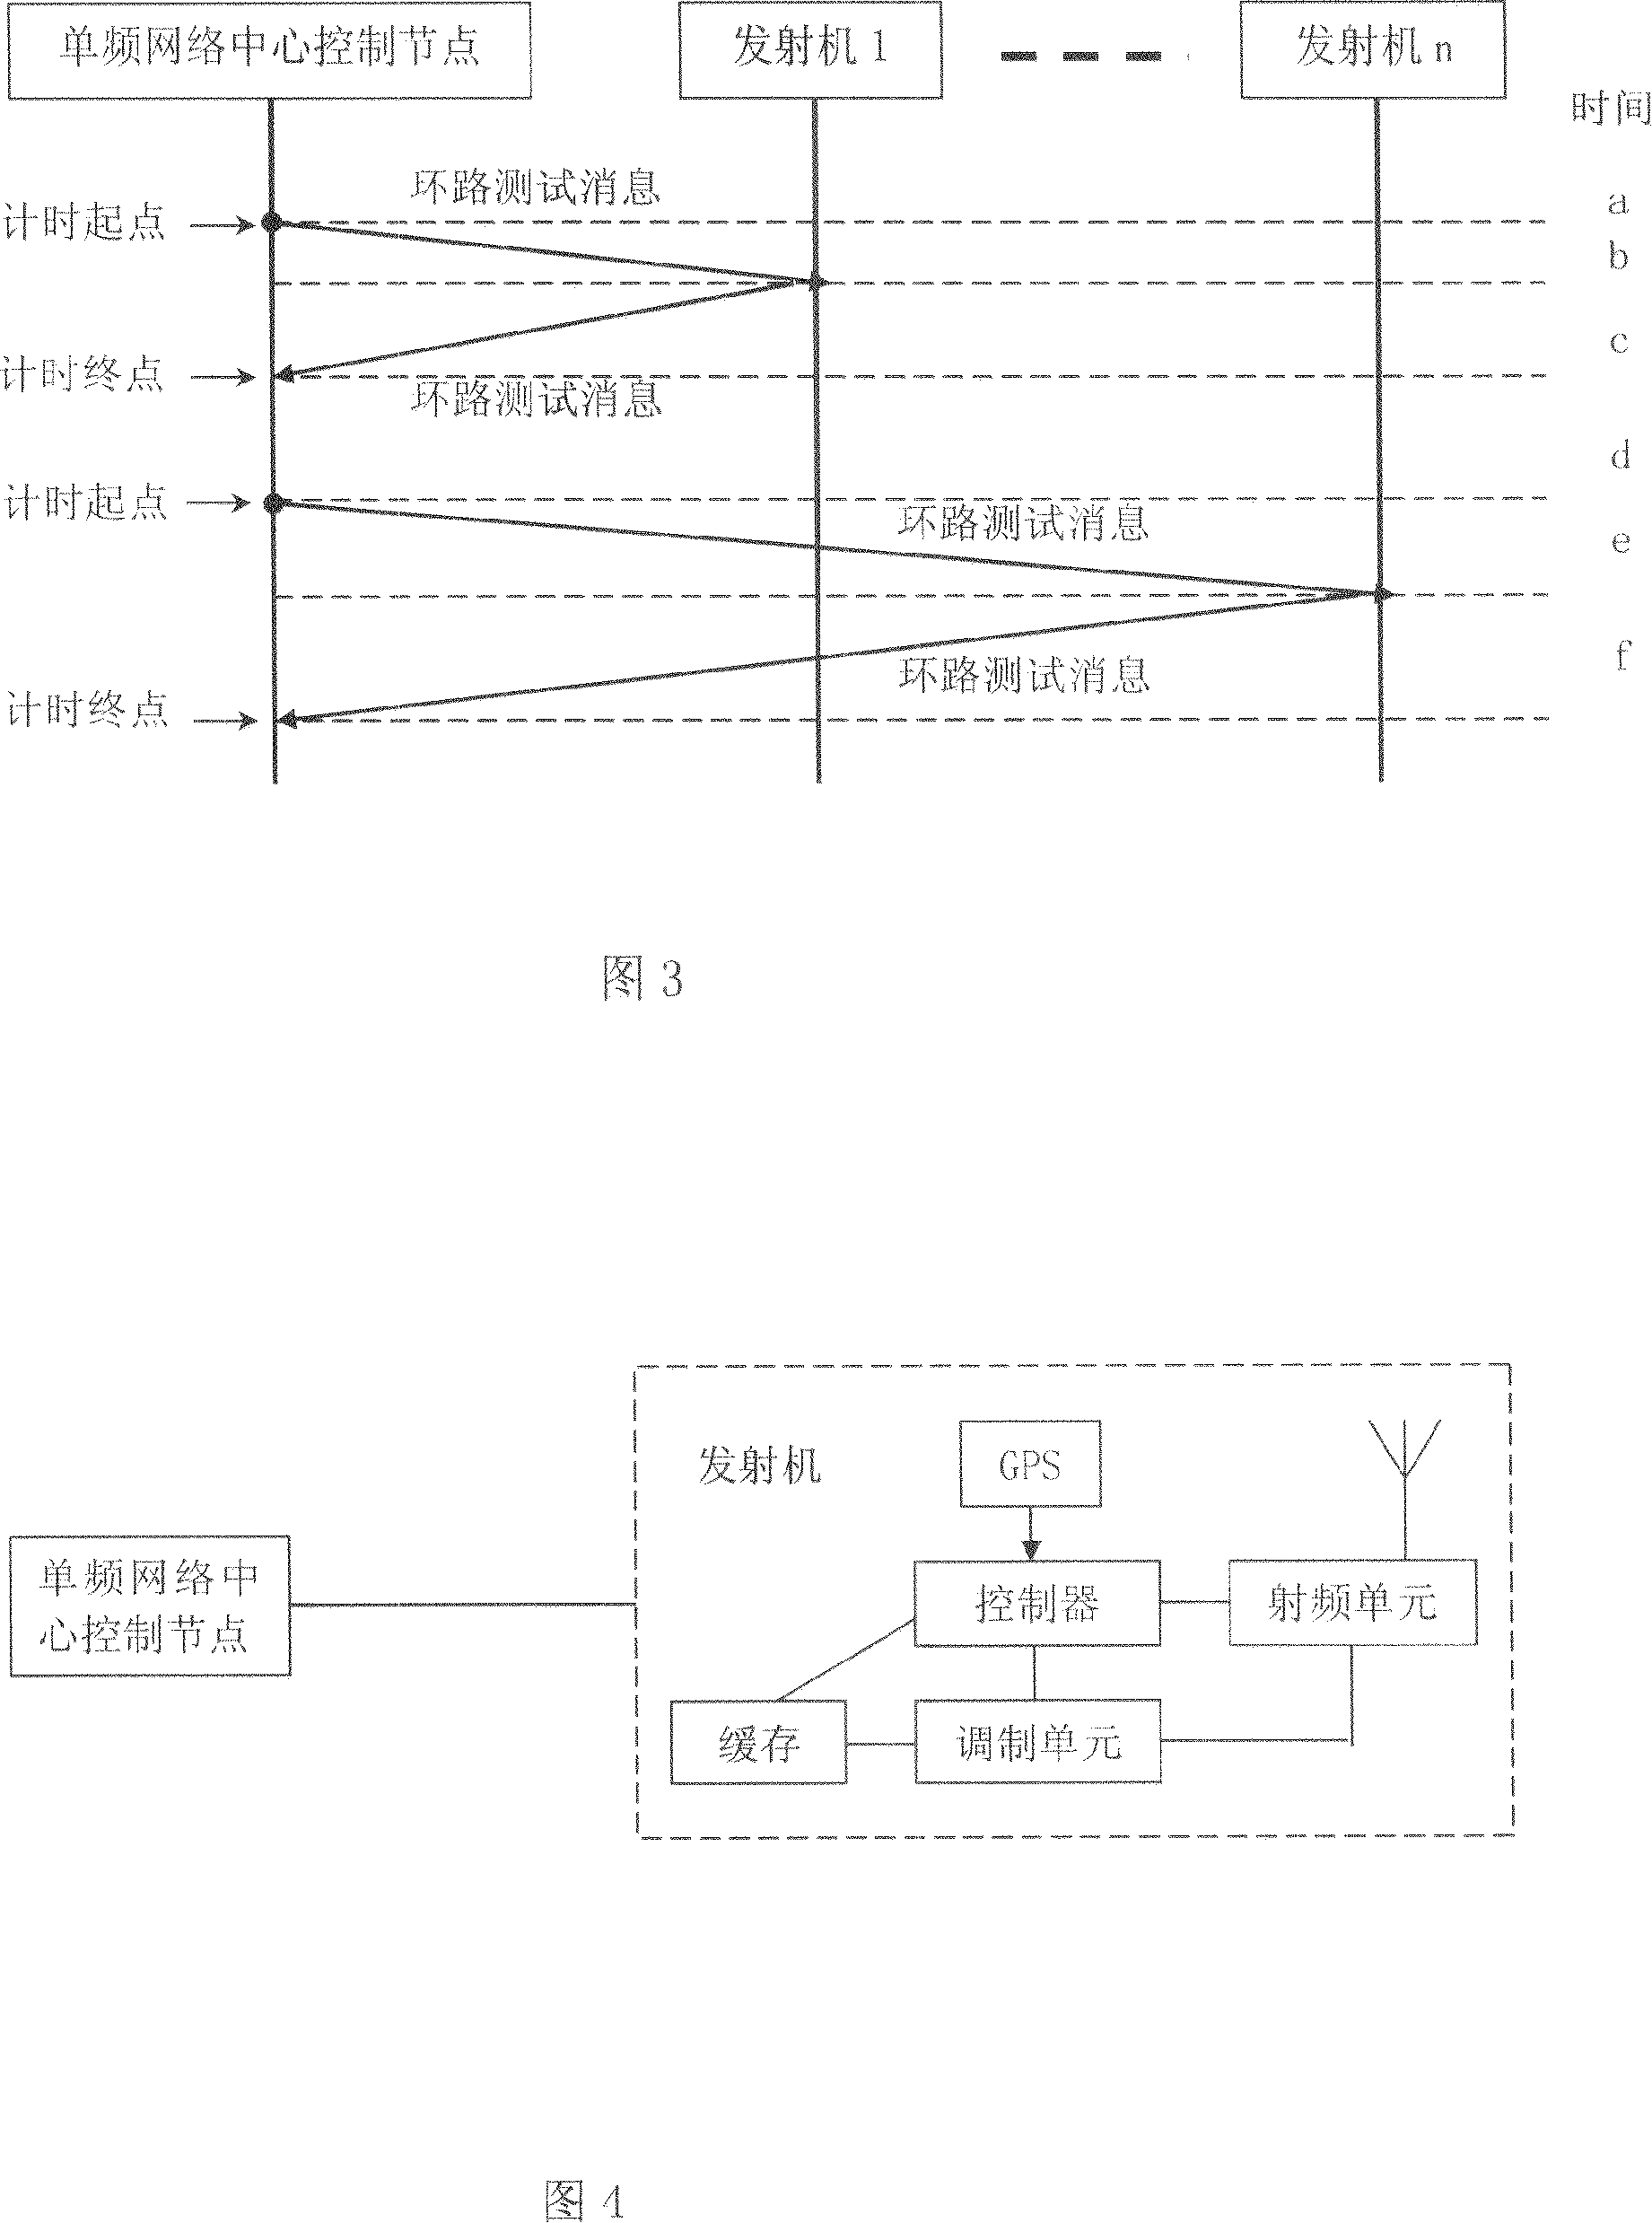 Single frequency network planning method based on orthogonal frequency division multiplexing technology